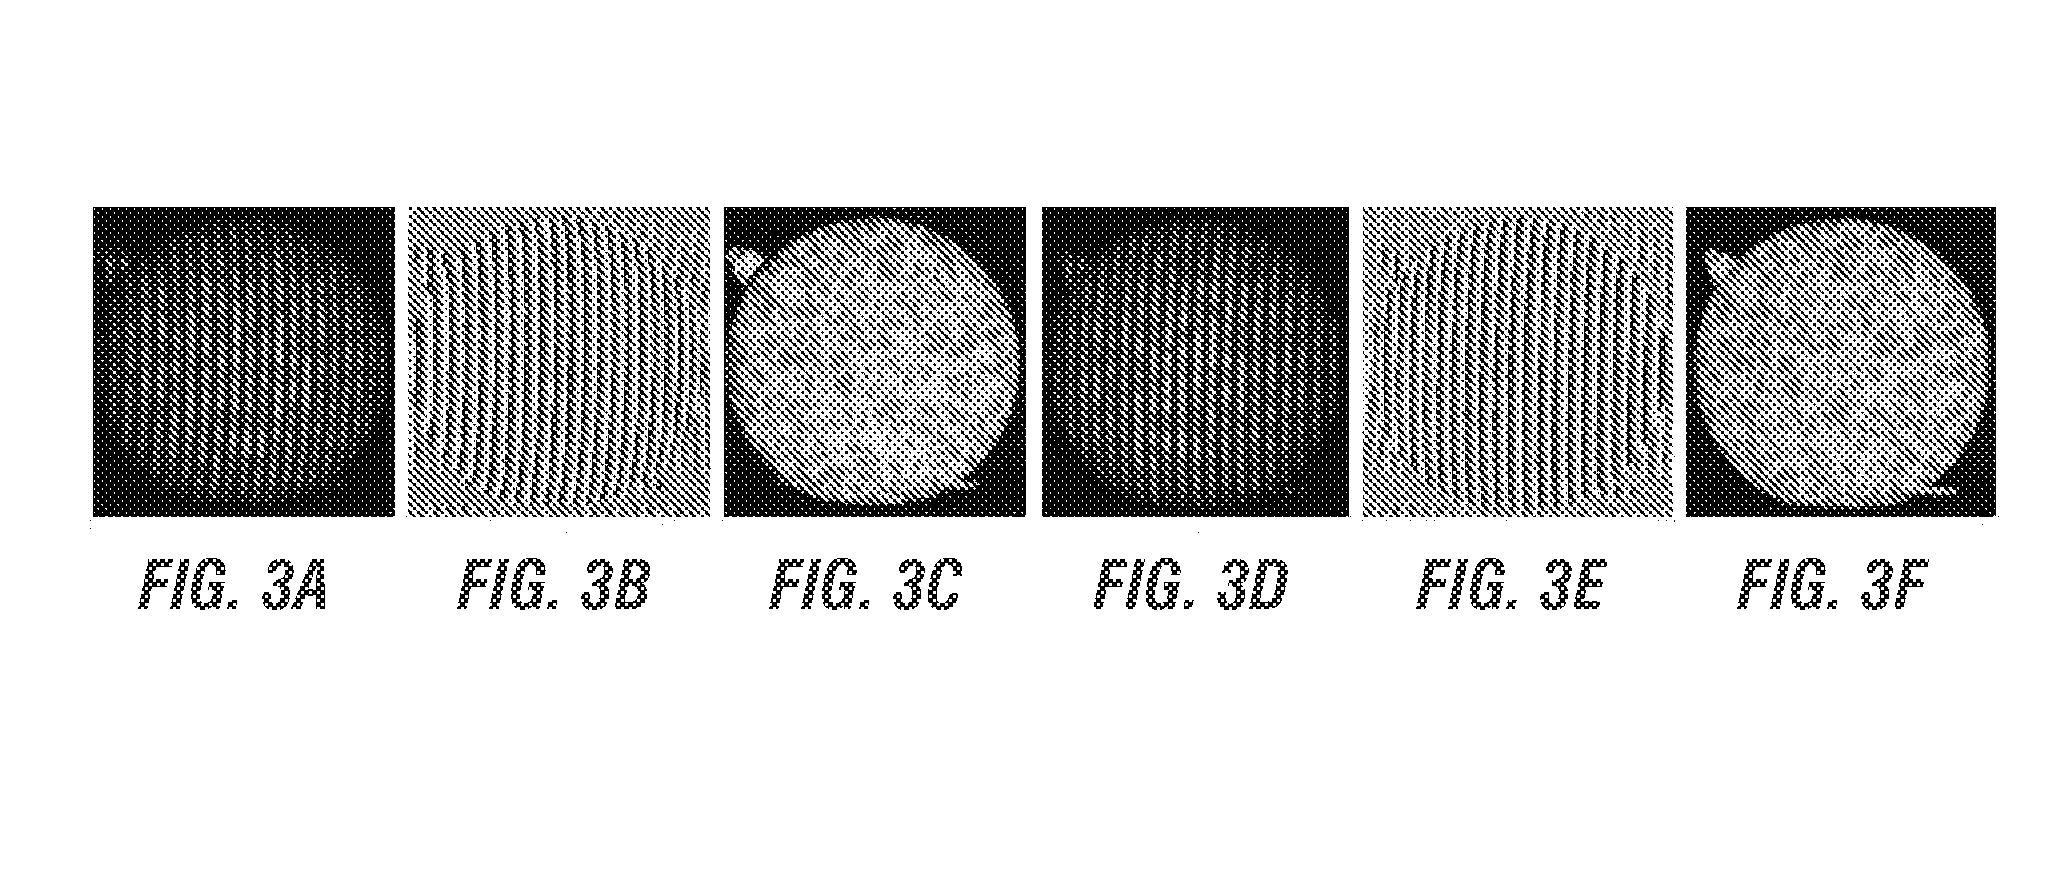 Absolute three-dimensional shape measurement using coded fringe patterns without phase unwrapping or projector calibration